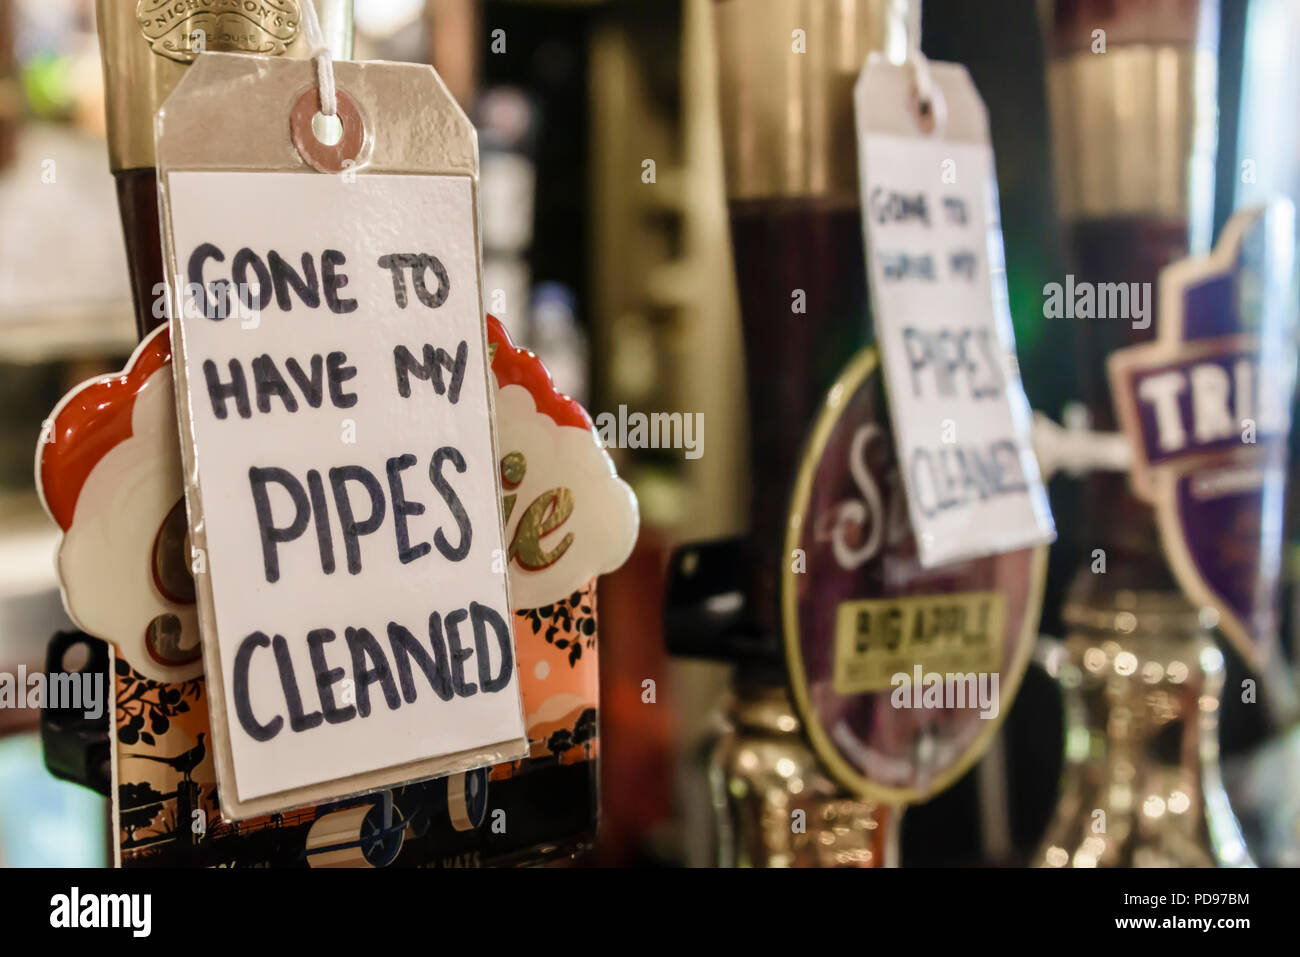 Signs on beer pumps in a British pub advising customers that the beer is not available as the pipes are being cleaned. Stock Photo